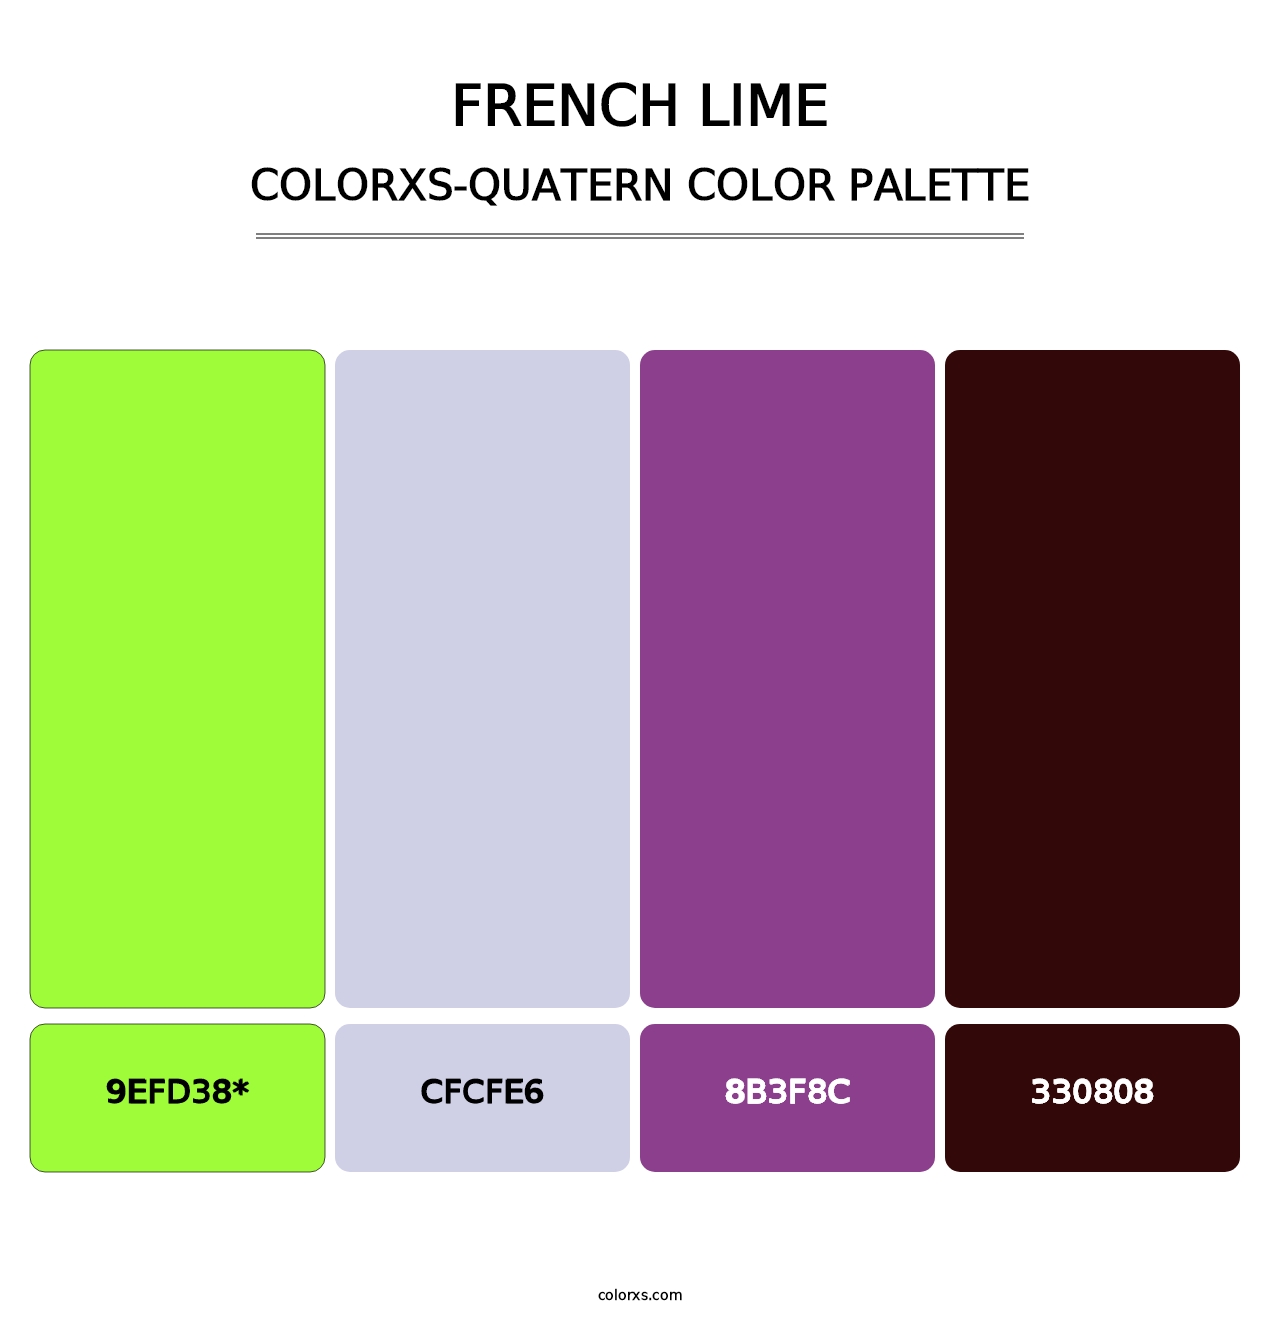 French Lime - Colorxs Quatern Palette